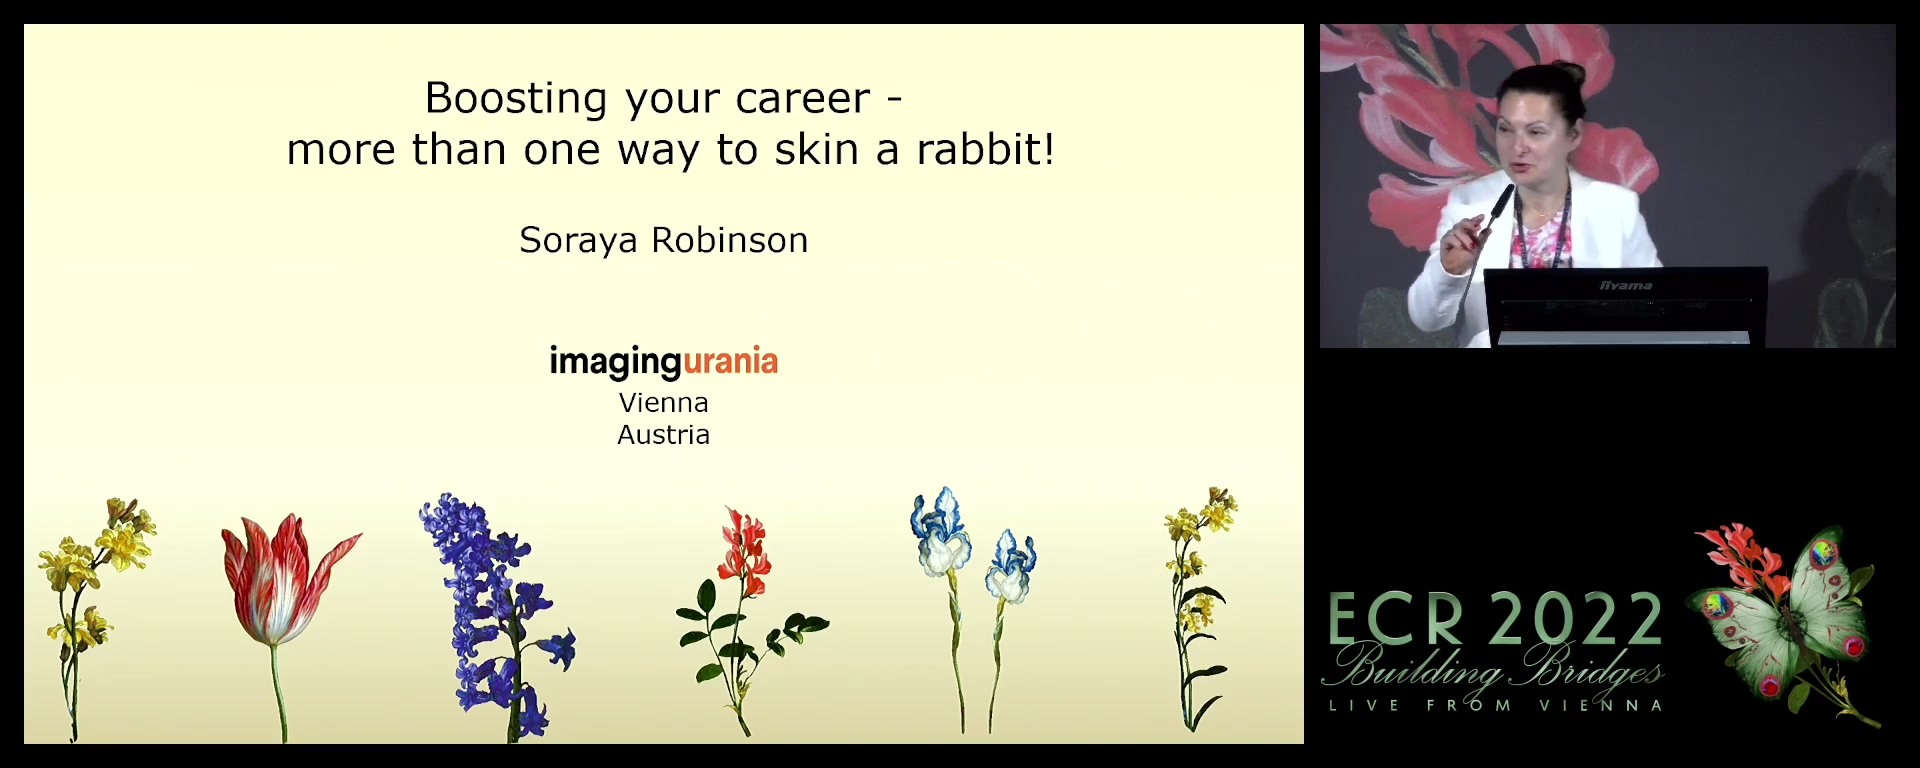 Boosting your career: more than one way to skin a rabbit!